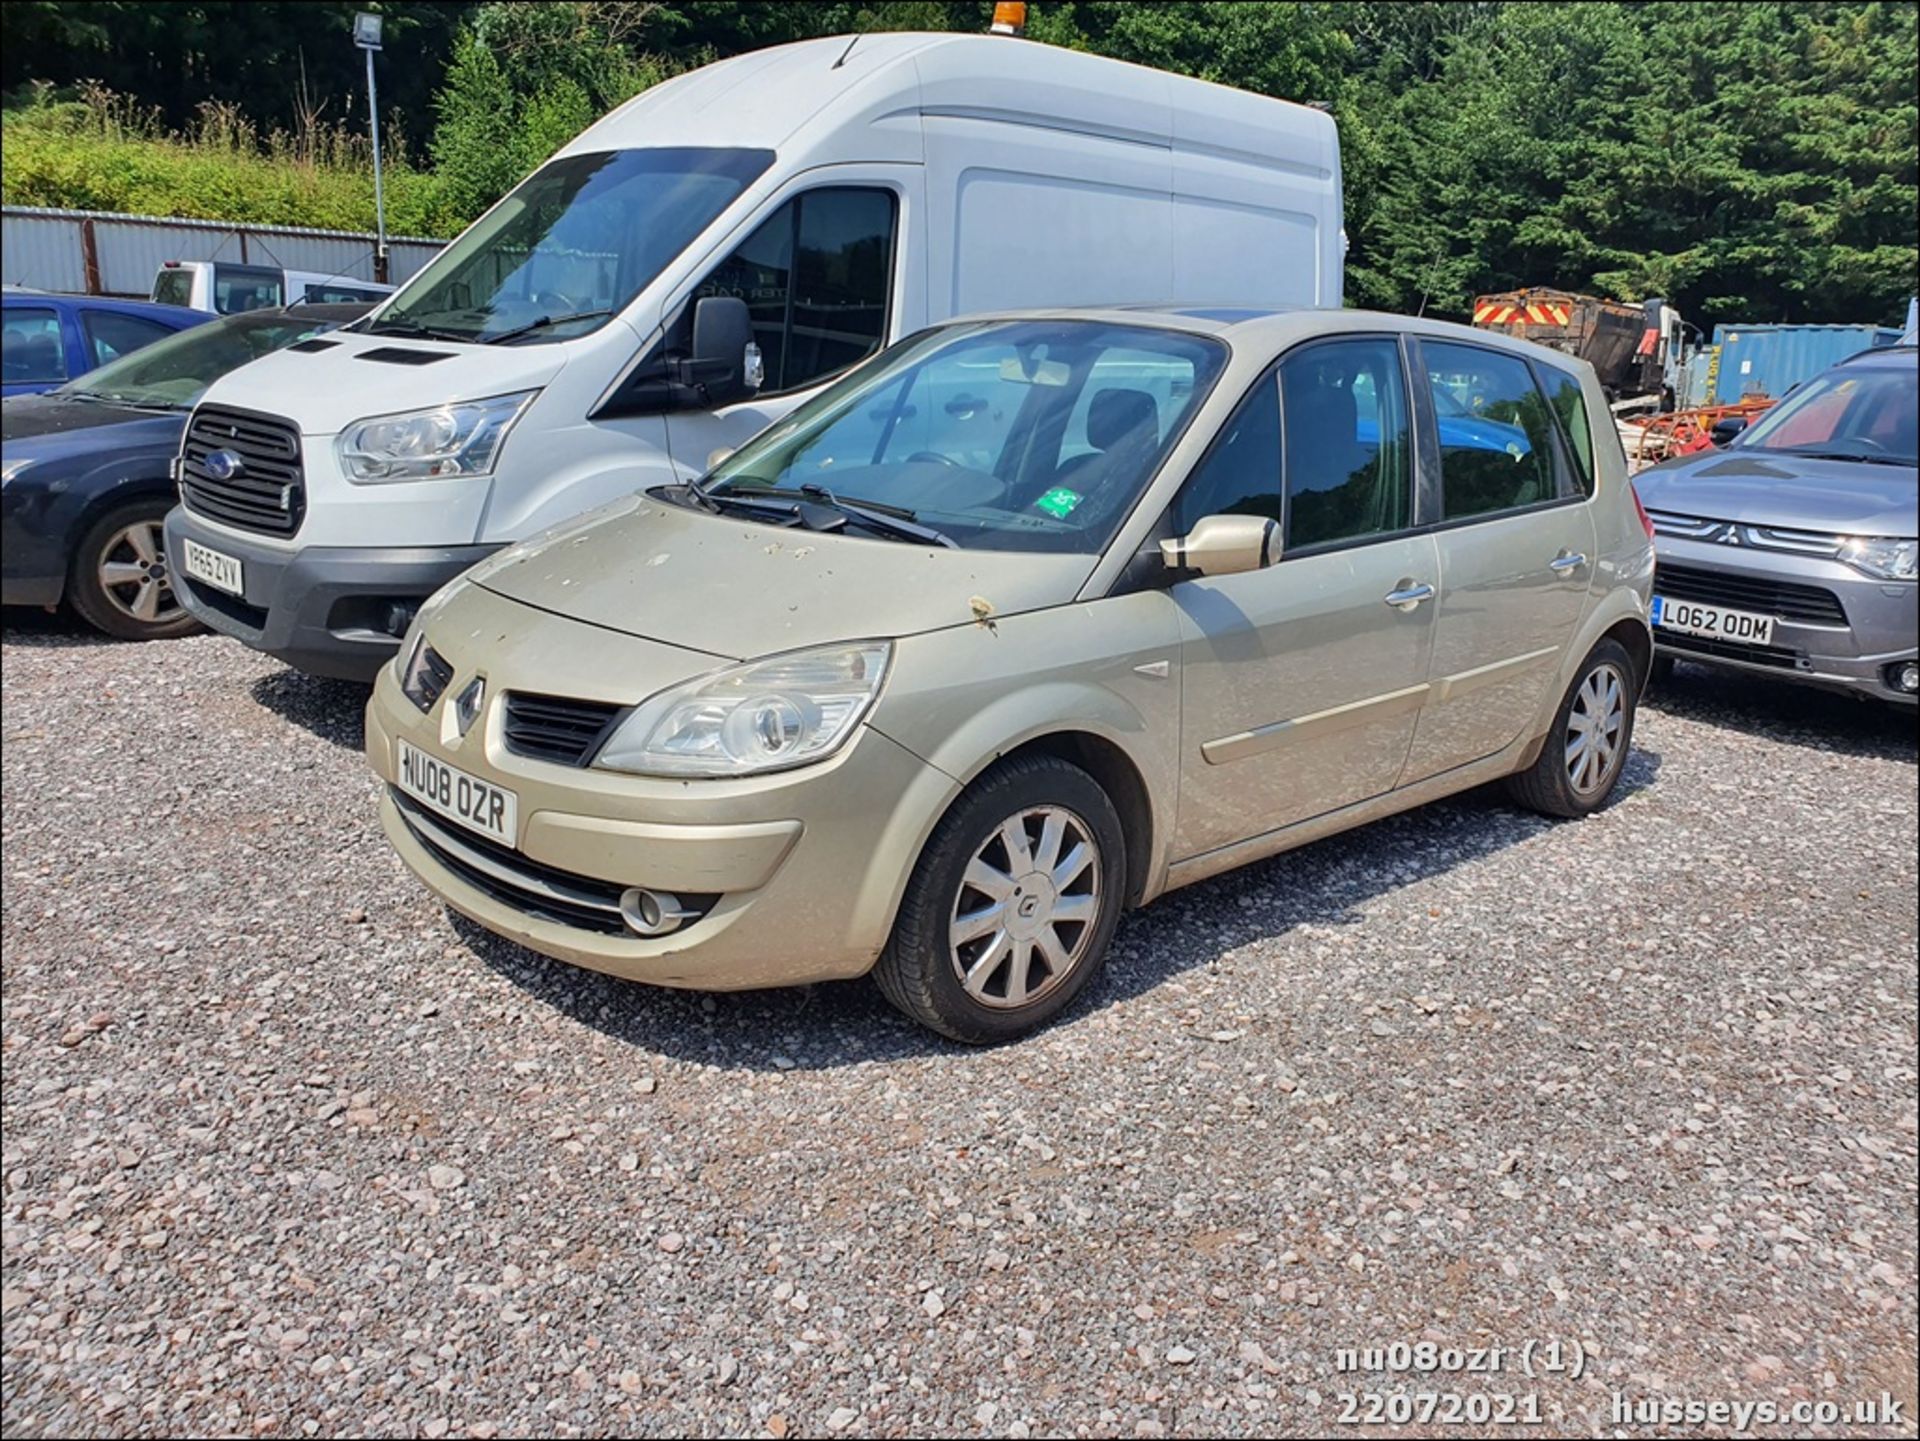 08/08 RENAULT SCENIC DYN DCI 106 - 1461cc 5dr MPV (Gold) - Image 2 of 16